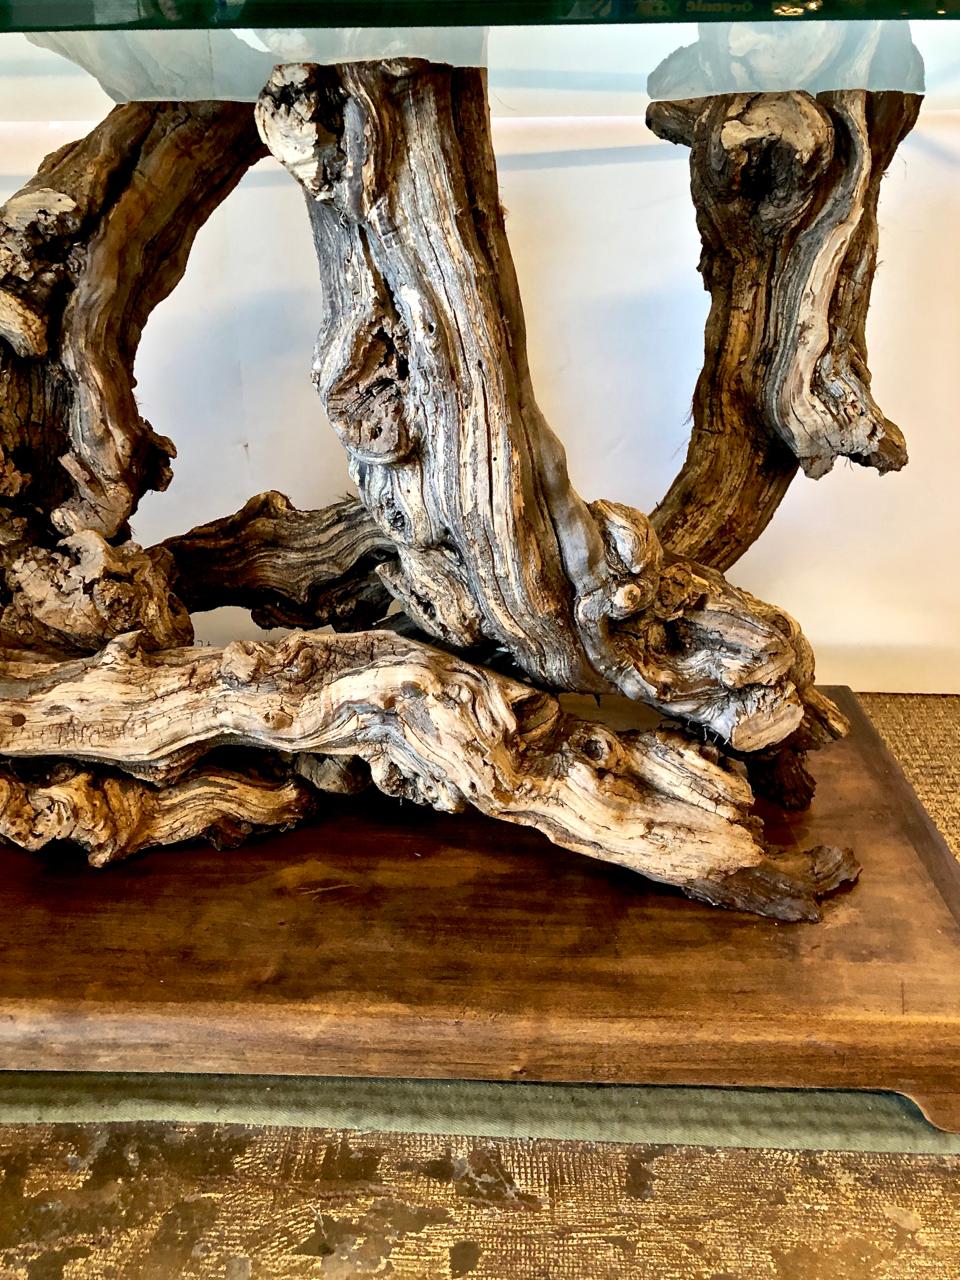 This is a superb example of a midcentury table that was created by intertwining large sculptural roots. The table spent many years out of doors acquiring a deep natural patina. The base has been newly strengthened and placed on a custom plinth. The